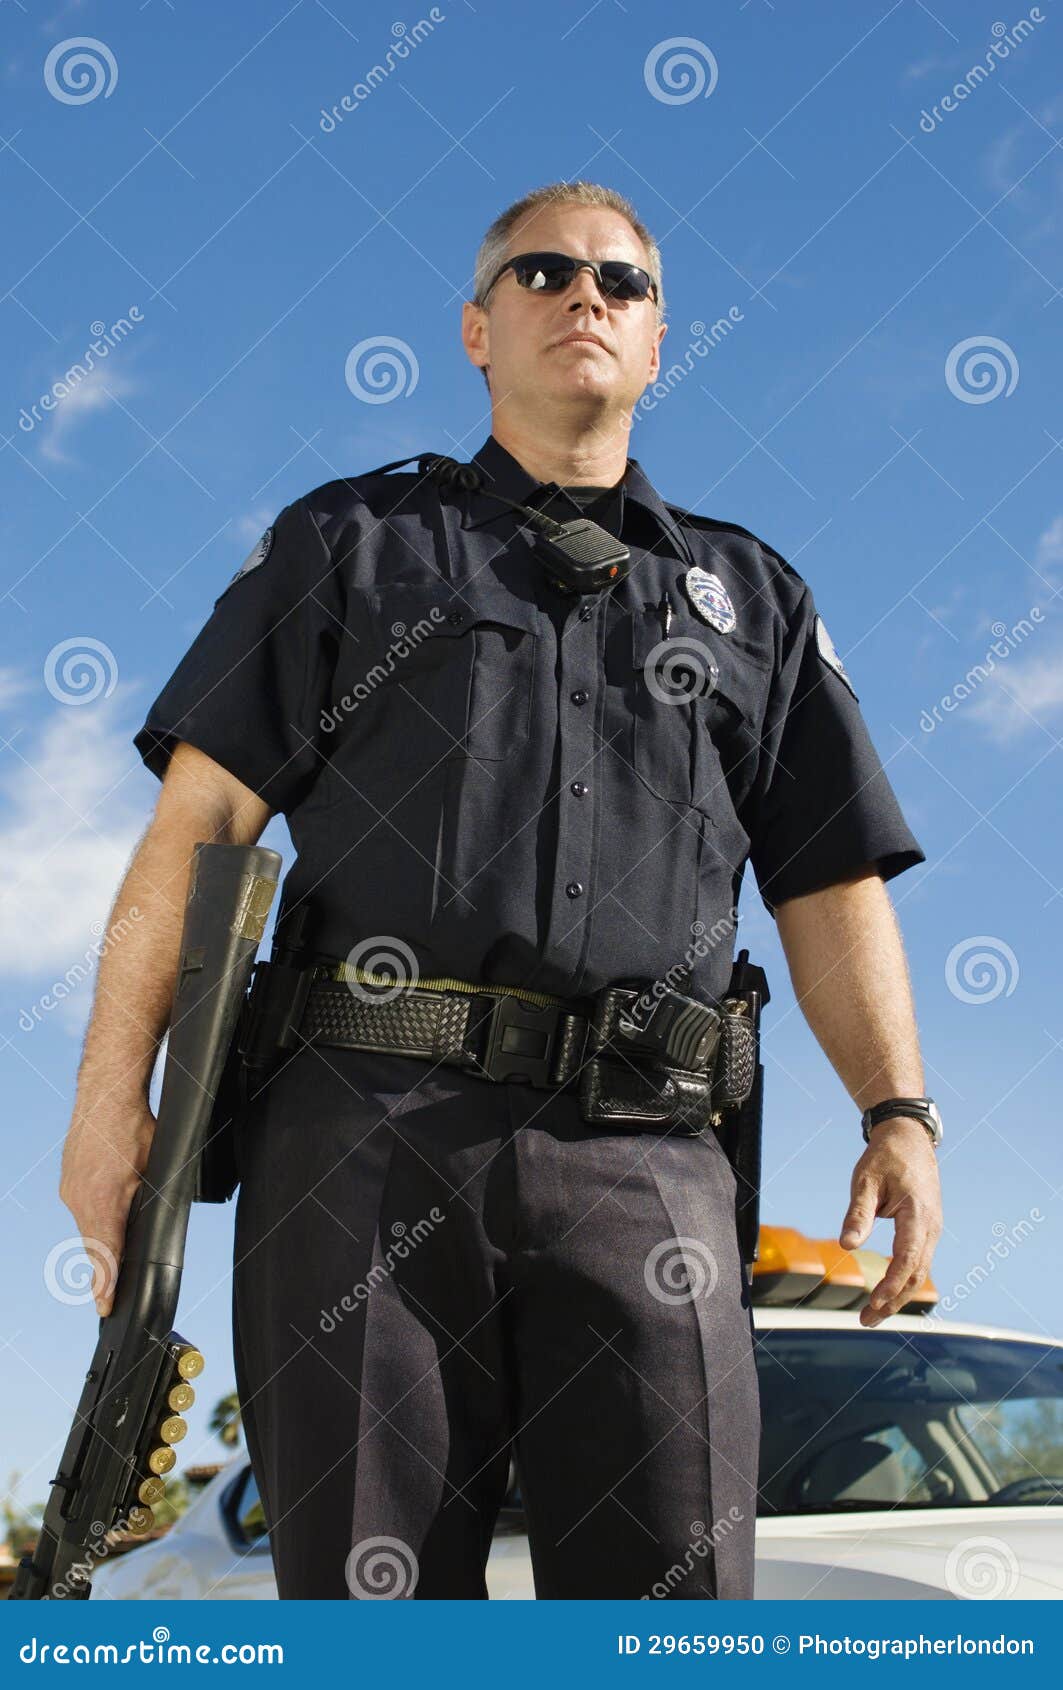 police officer holding weapon